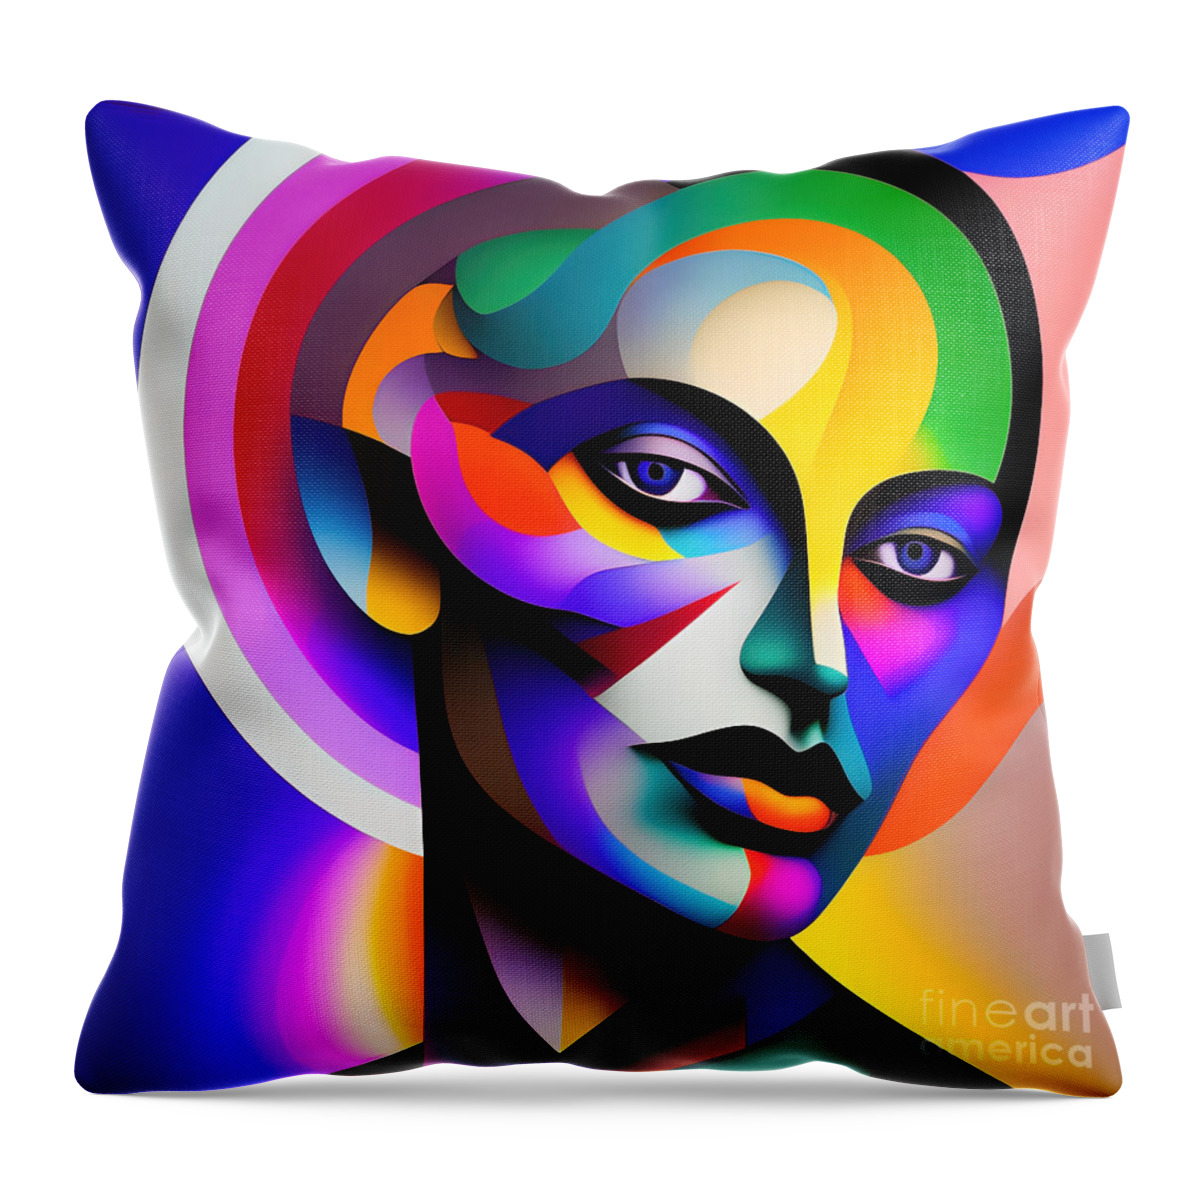 Portrait Throw Pillow featuring the digital art Colourful Abstract Portrait - 12 by Philip Preston